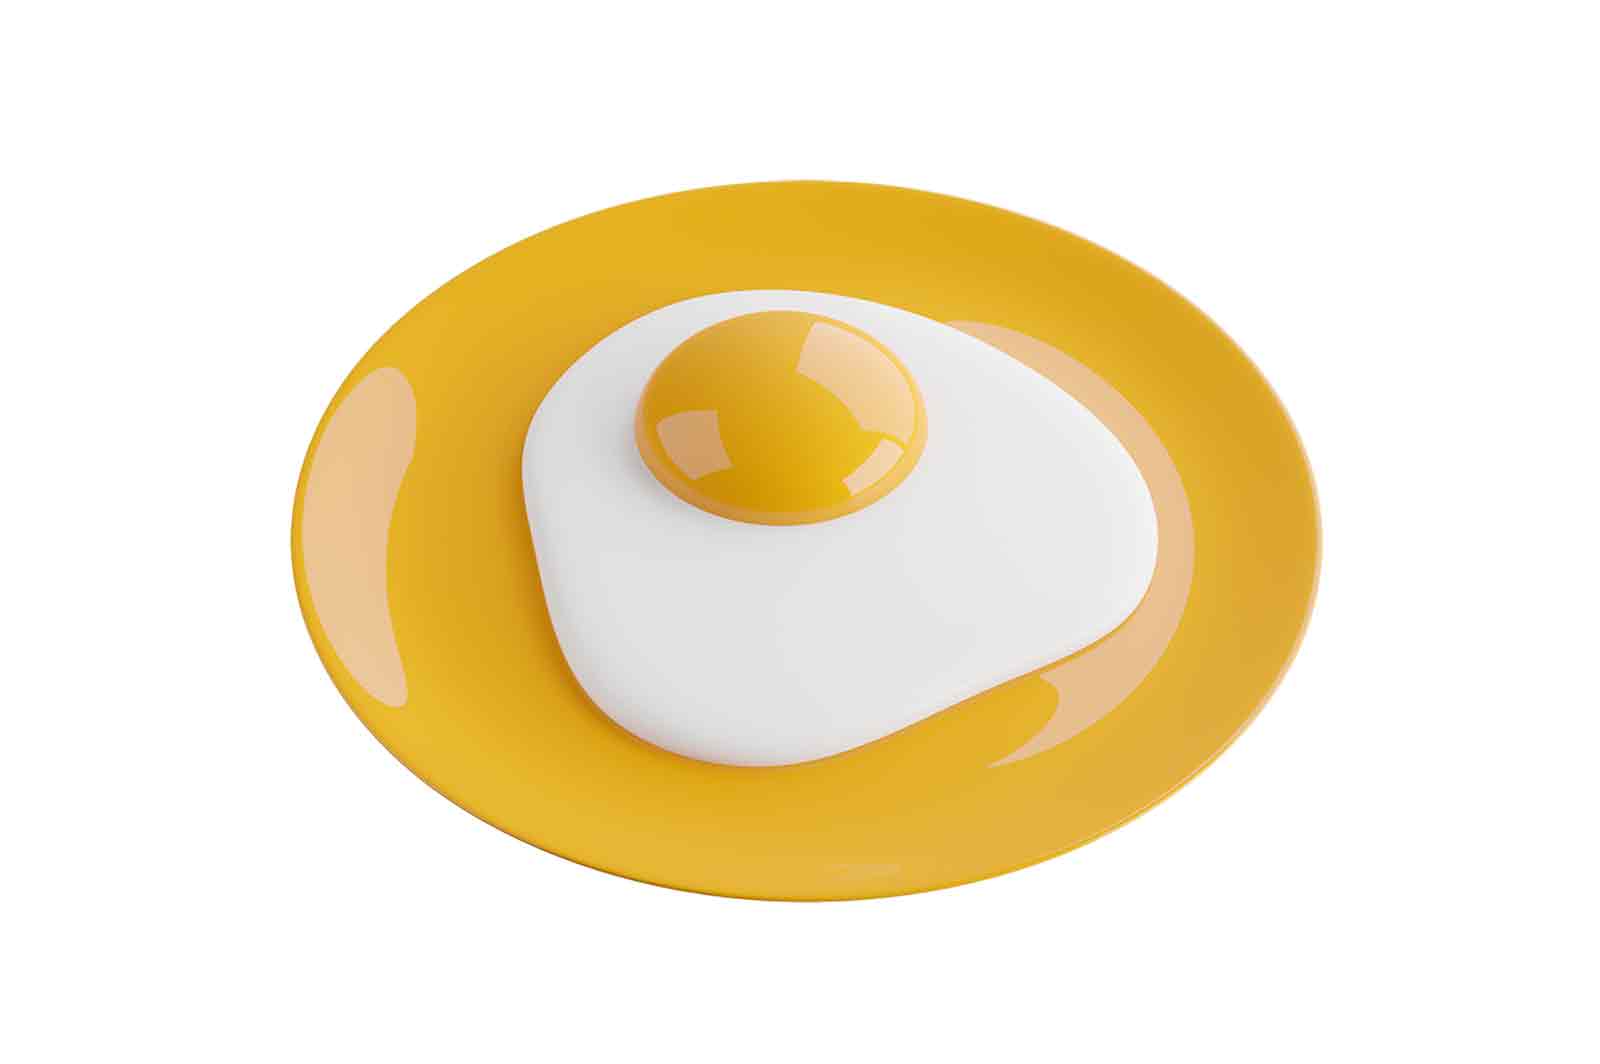 Fried egg on yellow plate, morning meal 3d rendered icon illustration. Breakfast dish, scrambled egg. Healthy nutrition